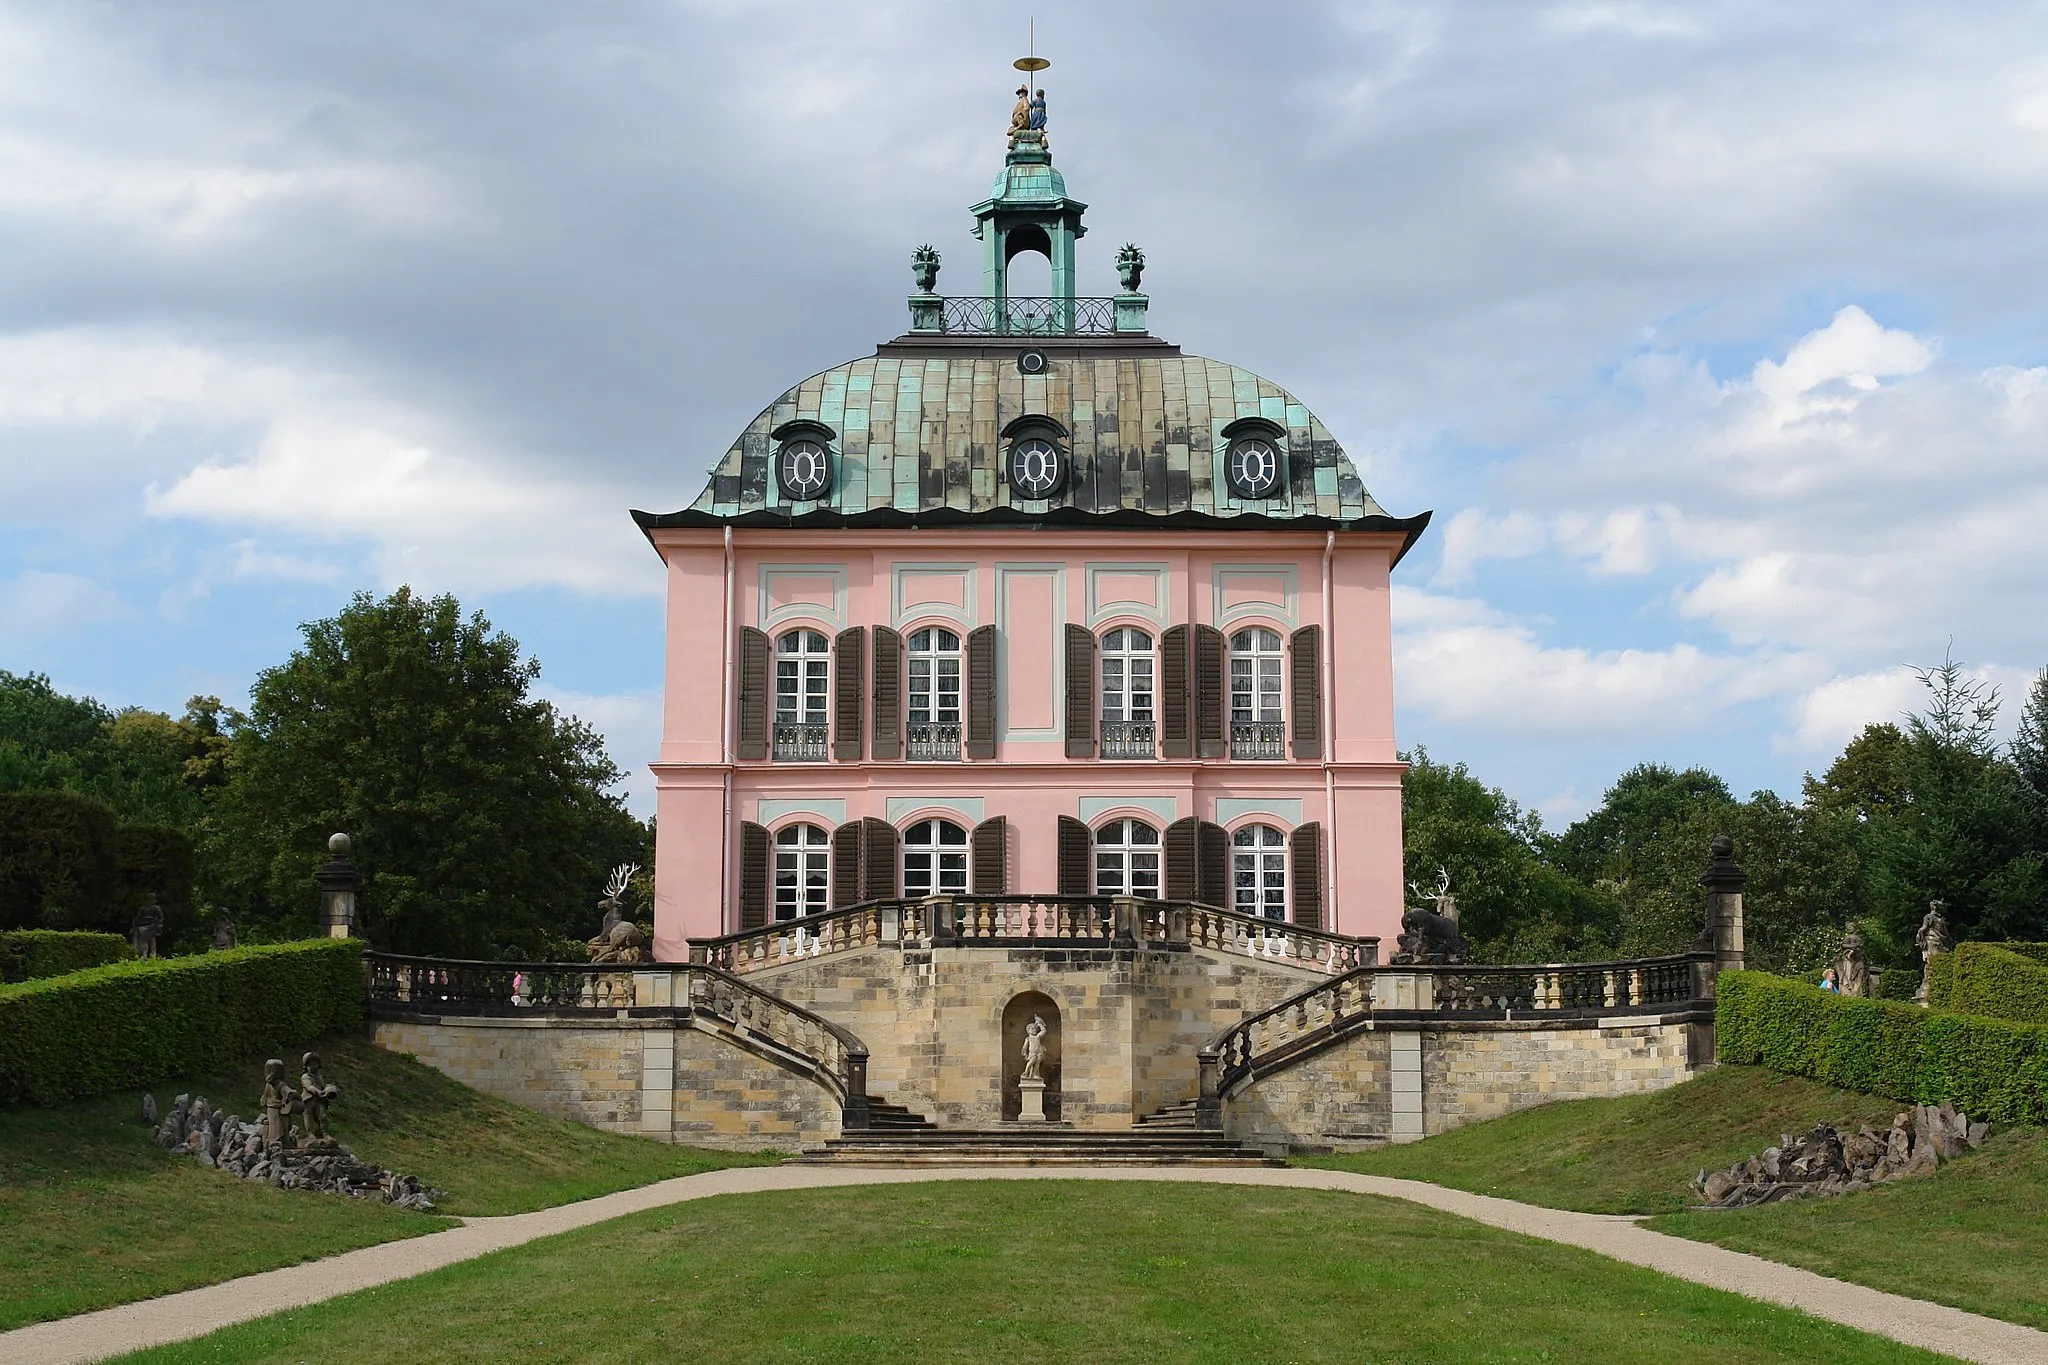 Photo showing: Fassanenschlösschen Moritzburg

One can see 11 statues on this image.